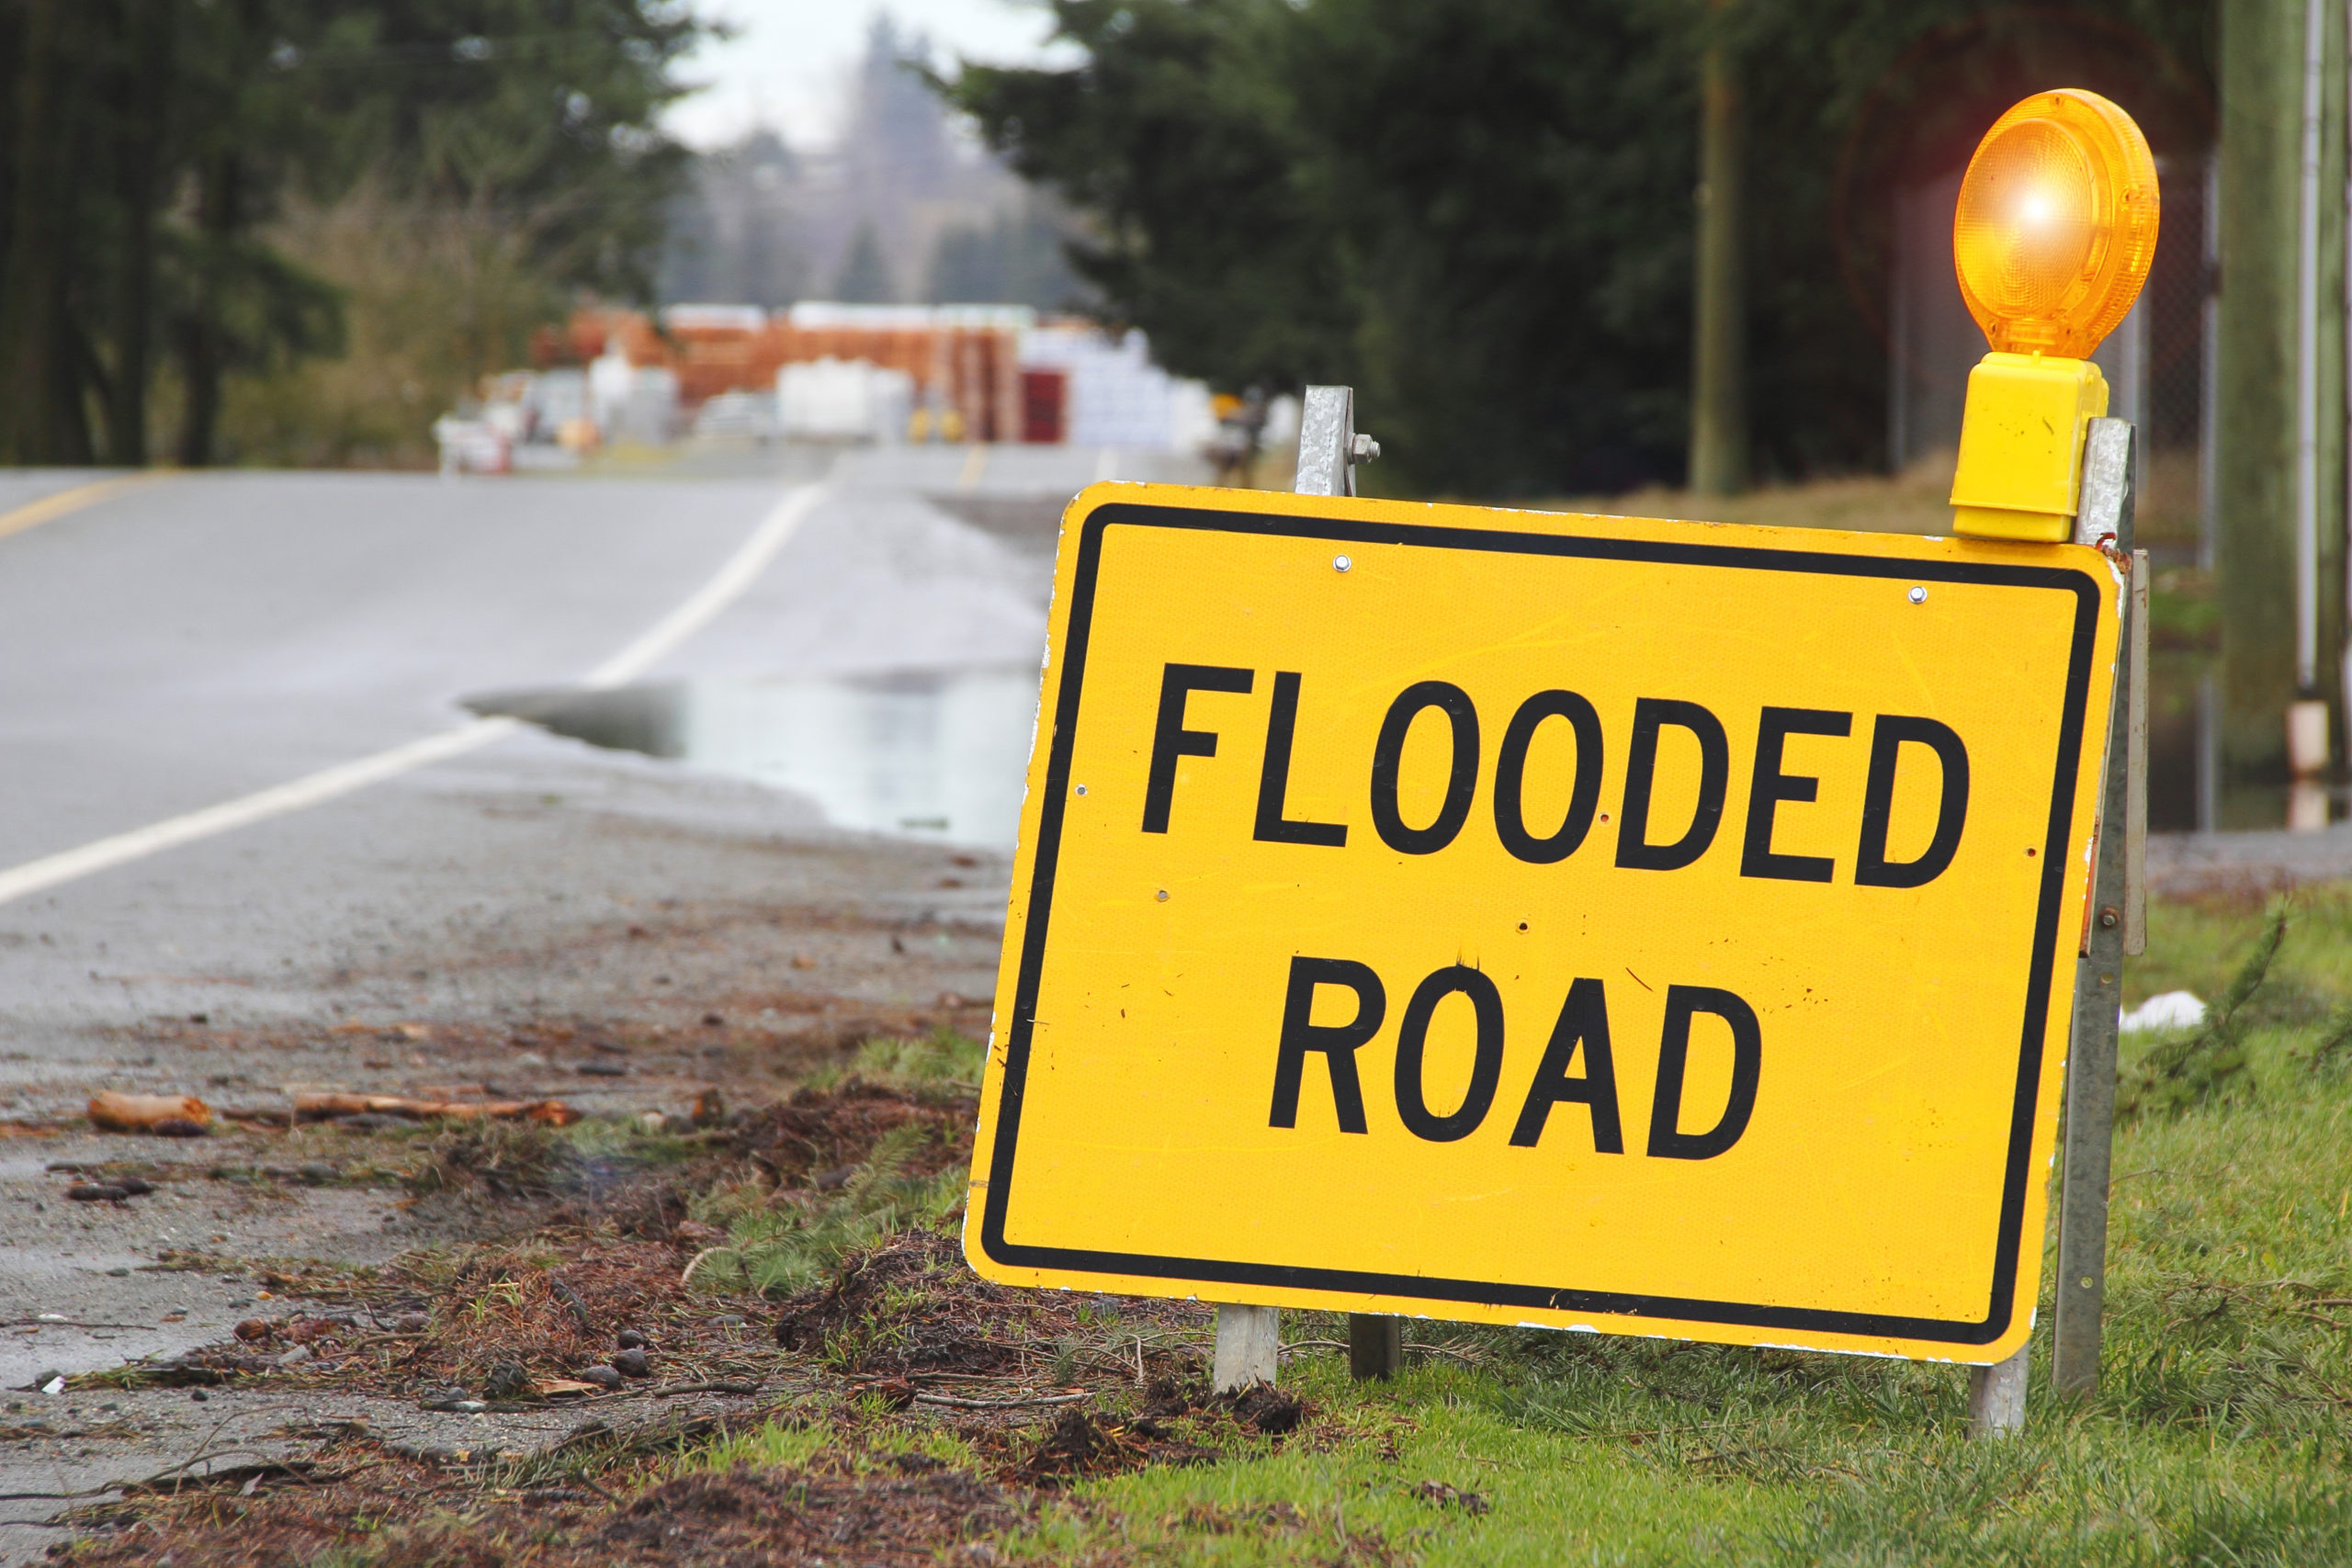 Warning sign for a flooded road [Shutterstock/Eric Buermeyer]